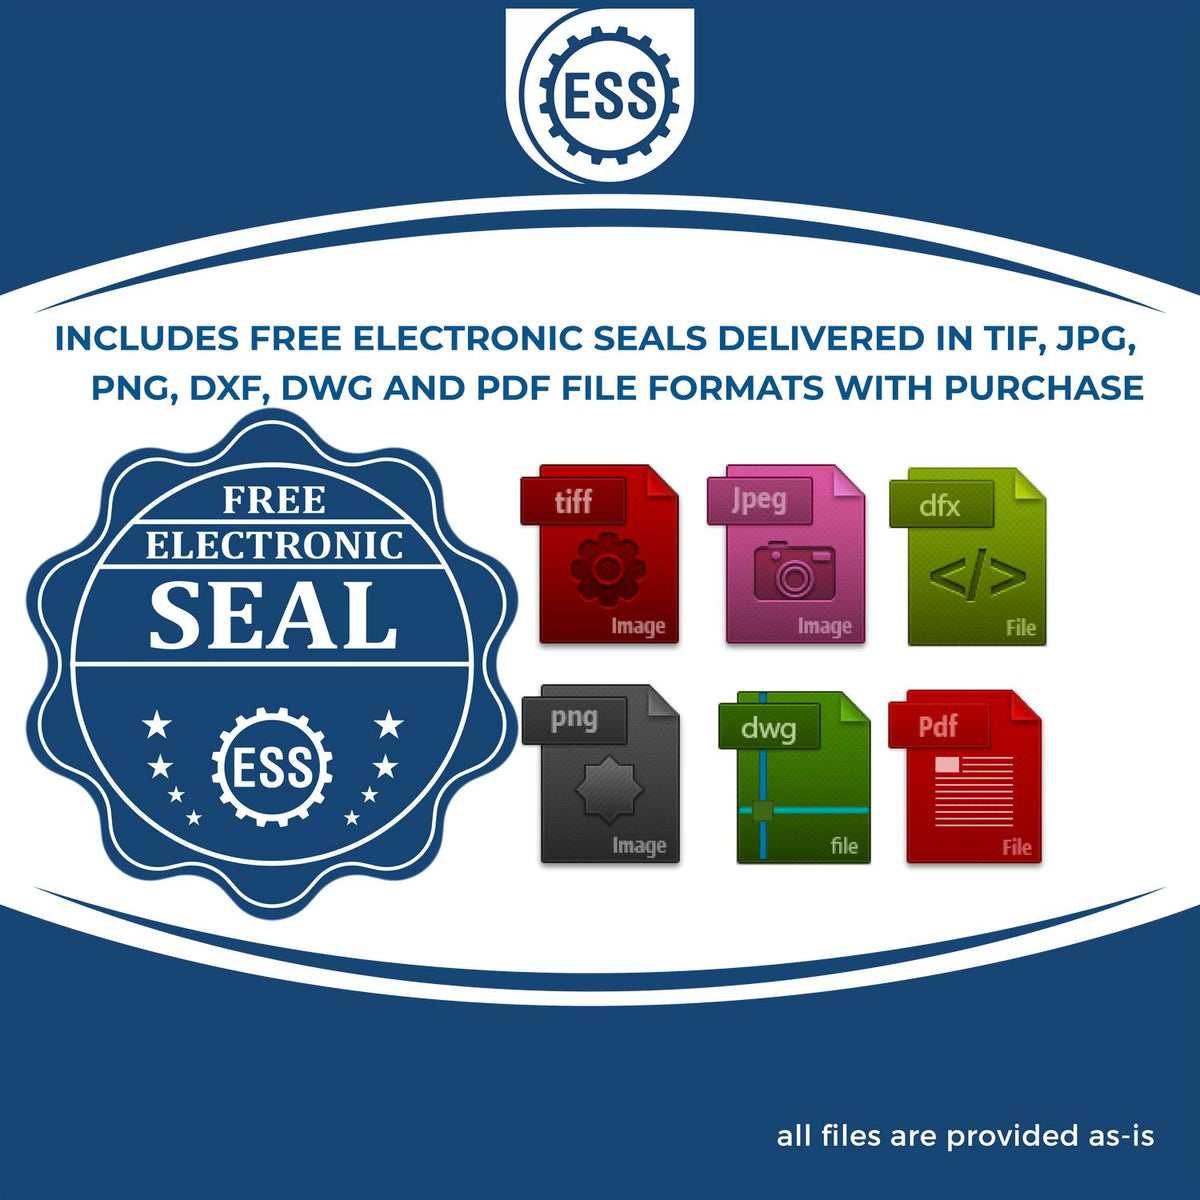 An infographic for the free electronic seal for the Long Reach Massachusetts Geology Seal illustrating the different file type icons such as DXF, DWG, TIF, JPG and PNG.